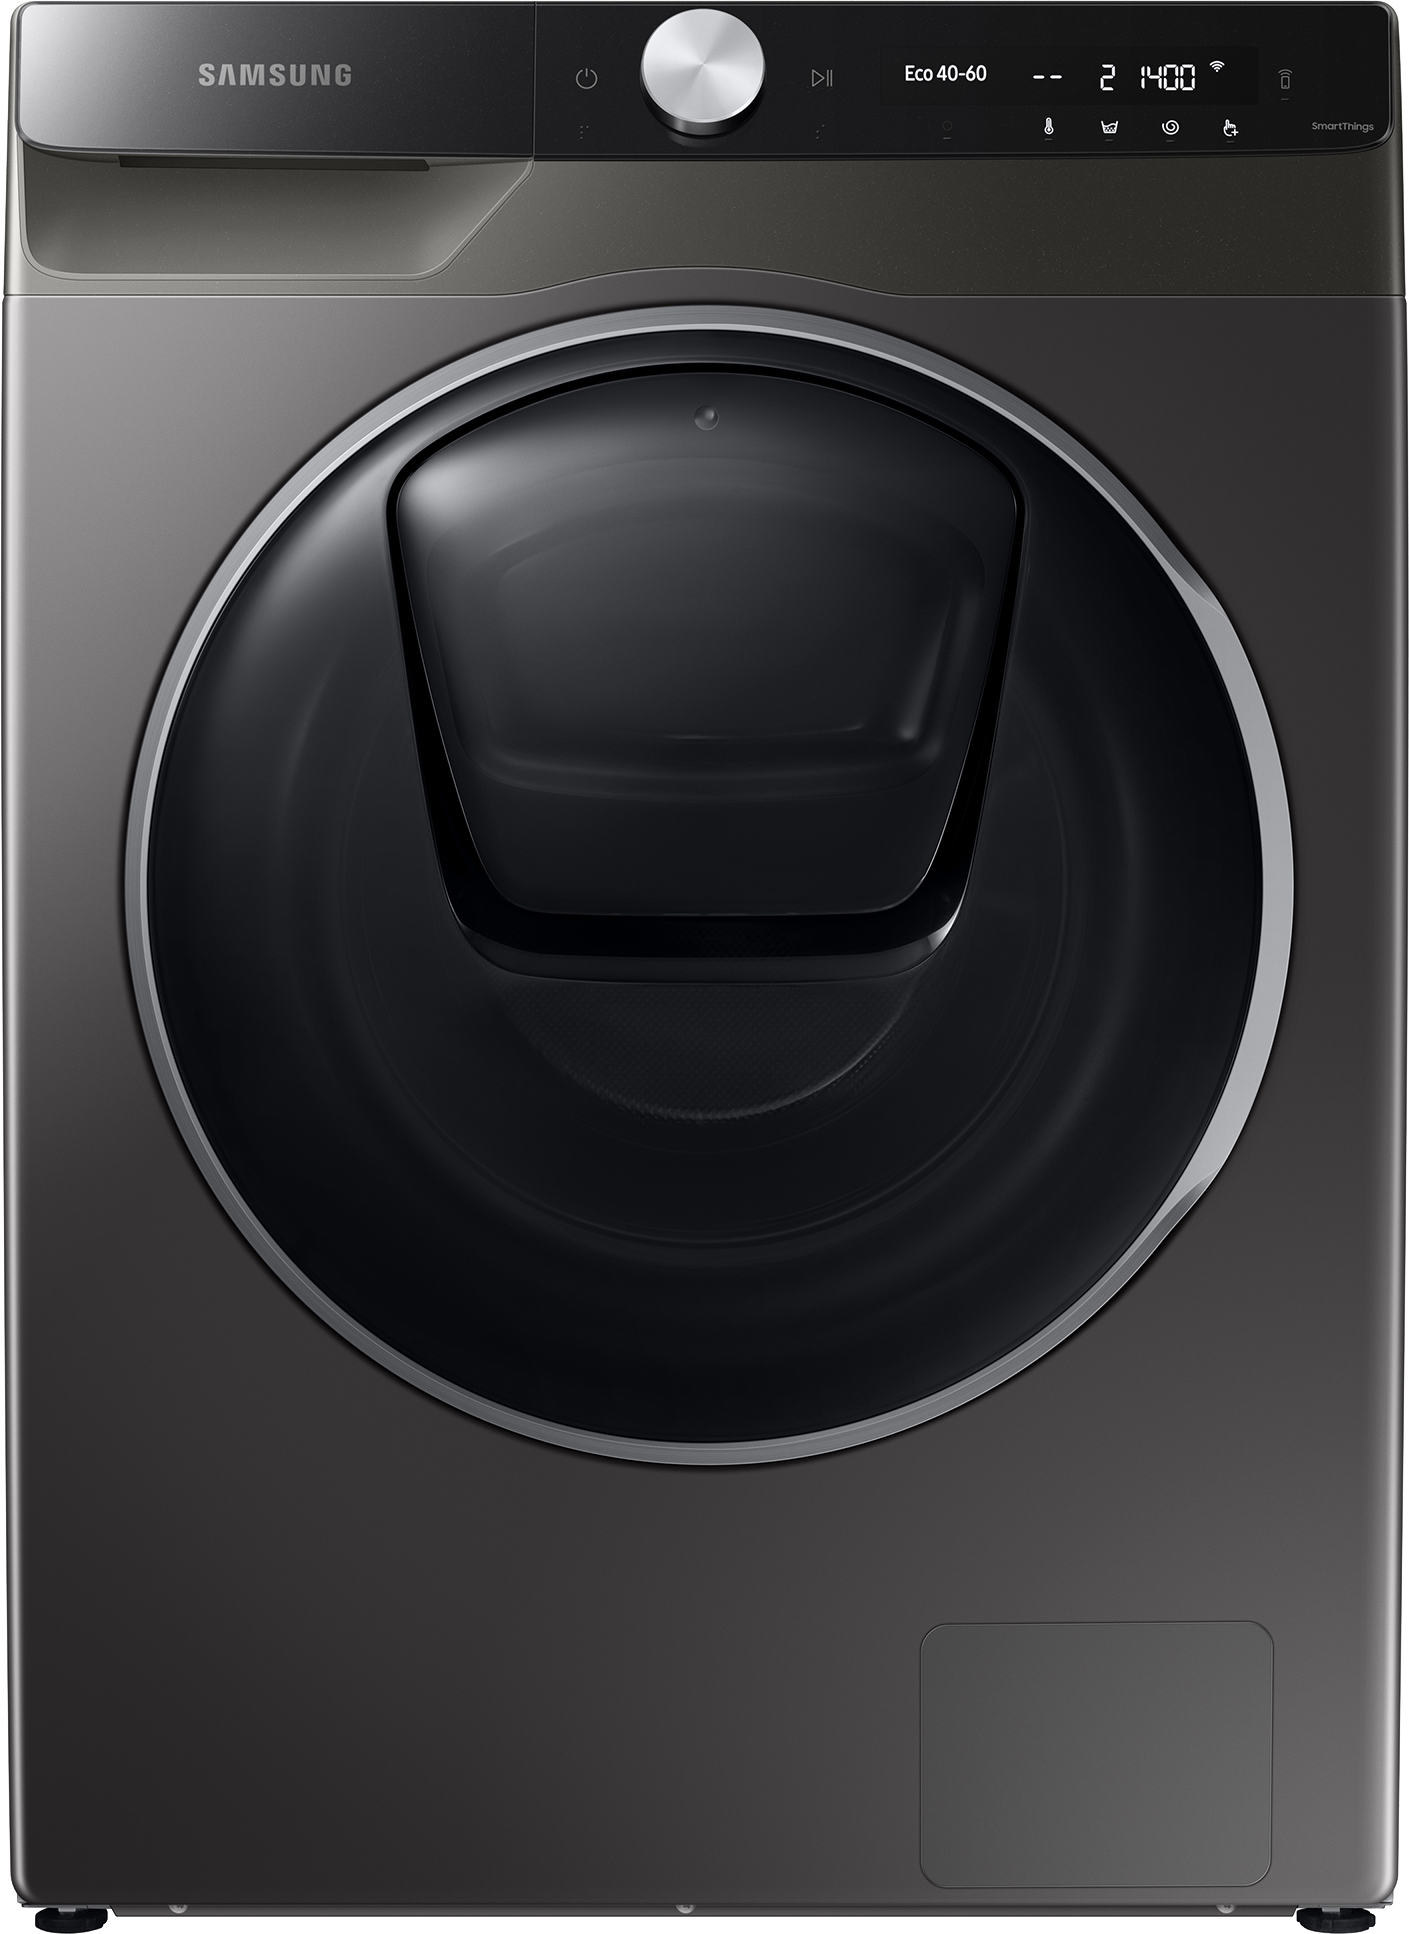 Samsung Series 9 QuickDrive AddWash WW90T986DSX 9kg Washing Machine with 1600 rpm - Graphite - A Rated Silver